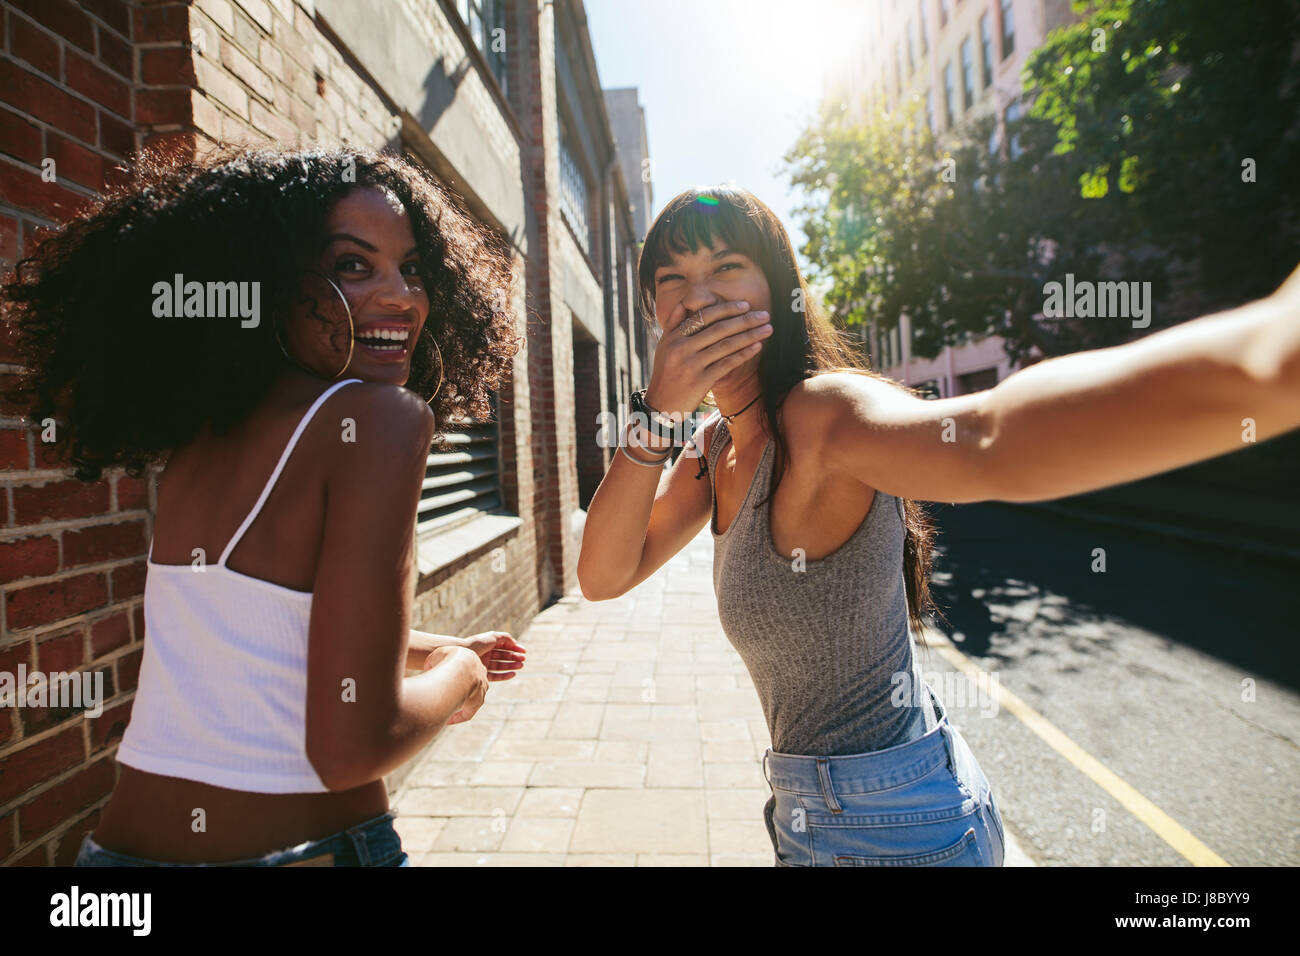 Shot from behind of two young women walking on city street. Female friends walking together outdoors and having fun. Stock Photo